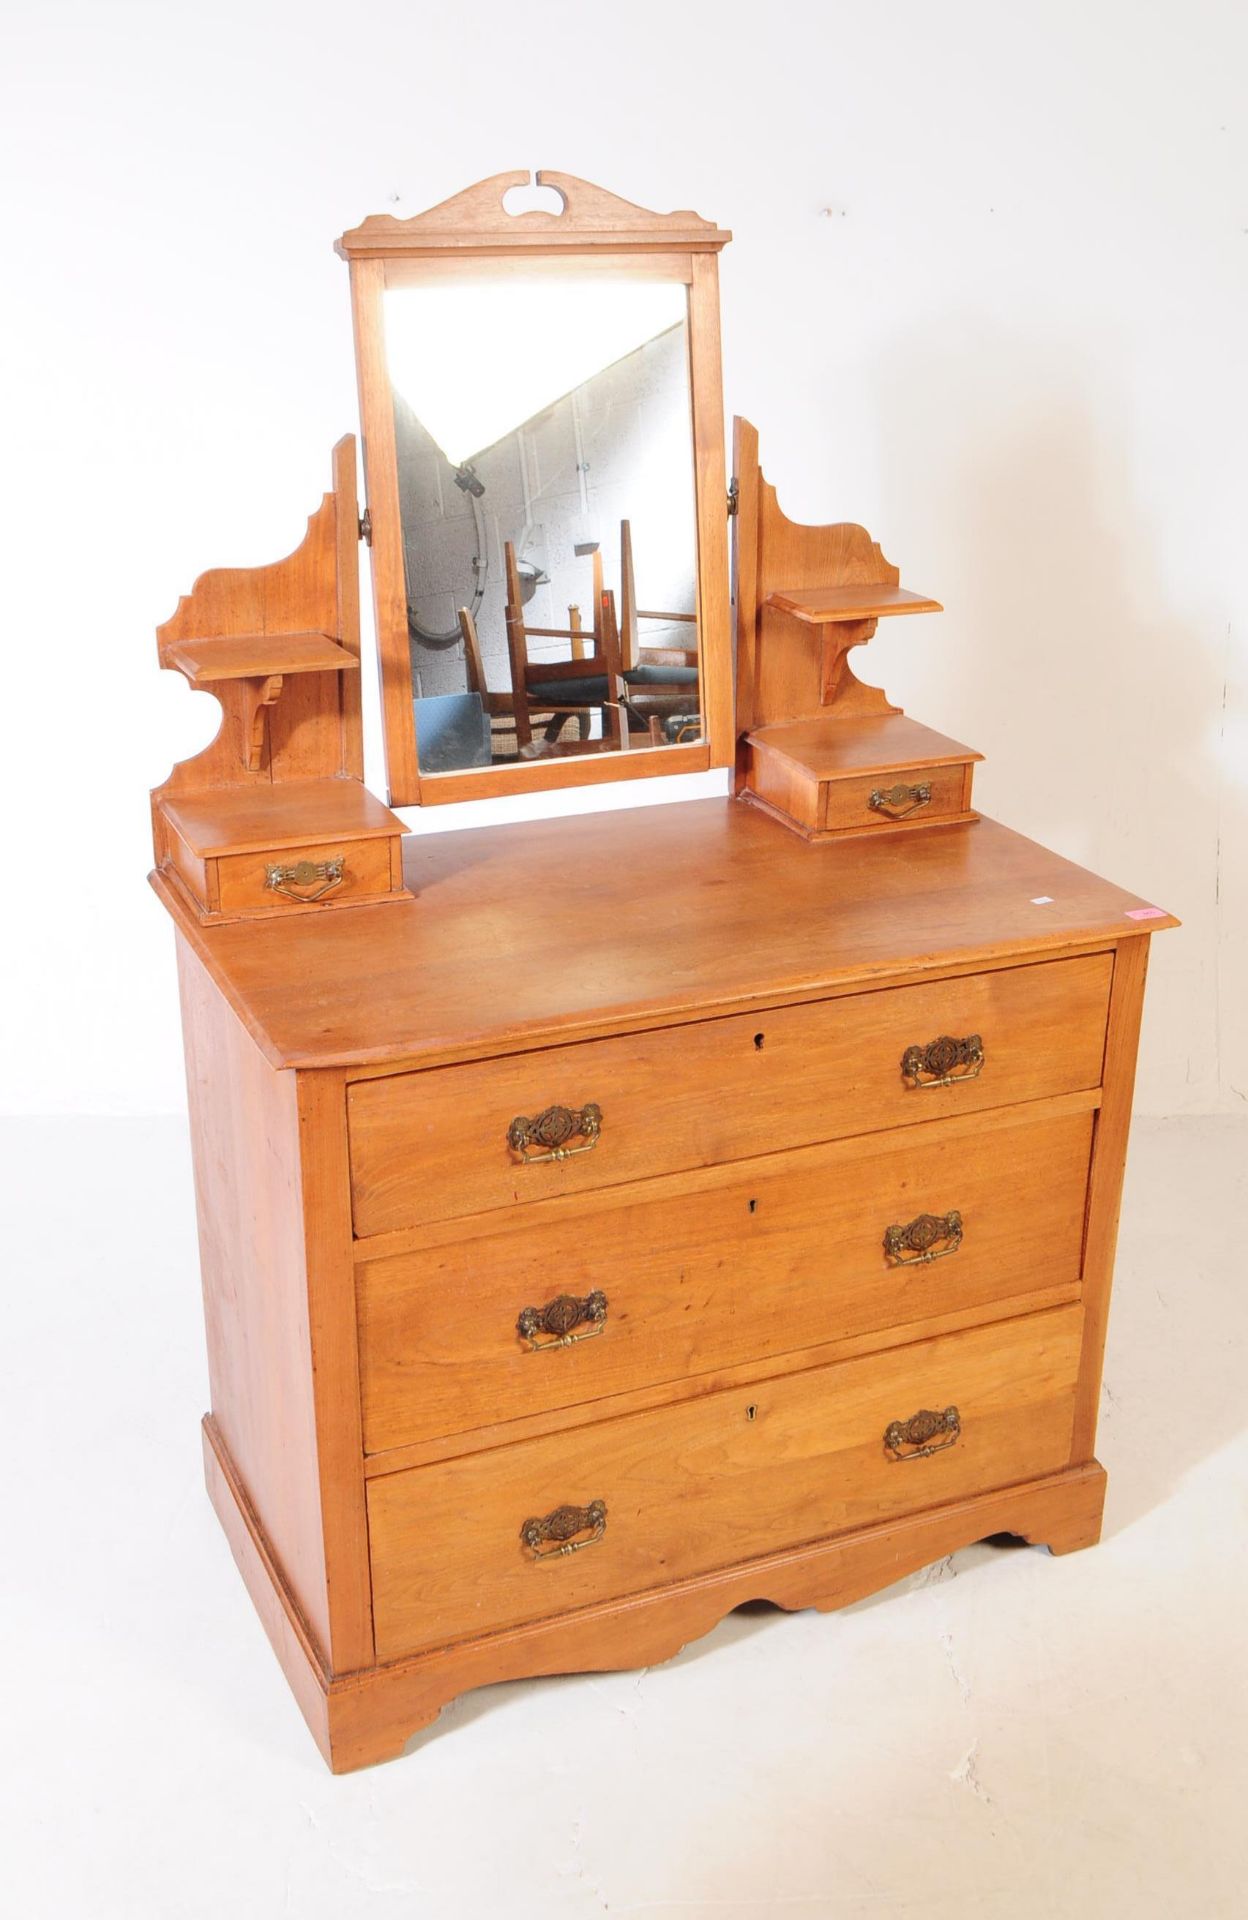 EARLY 20TH CENTURY SATINWOOD DRESSING CHEST - Image 2 of 4